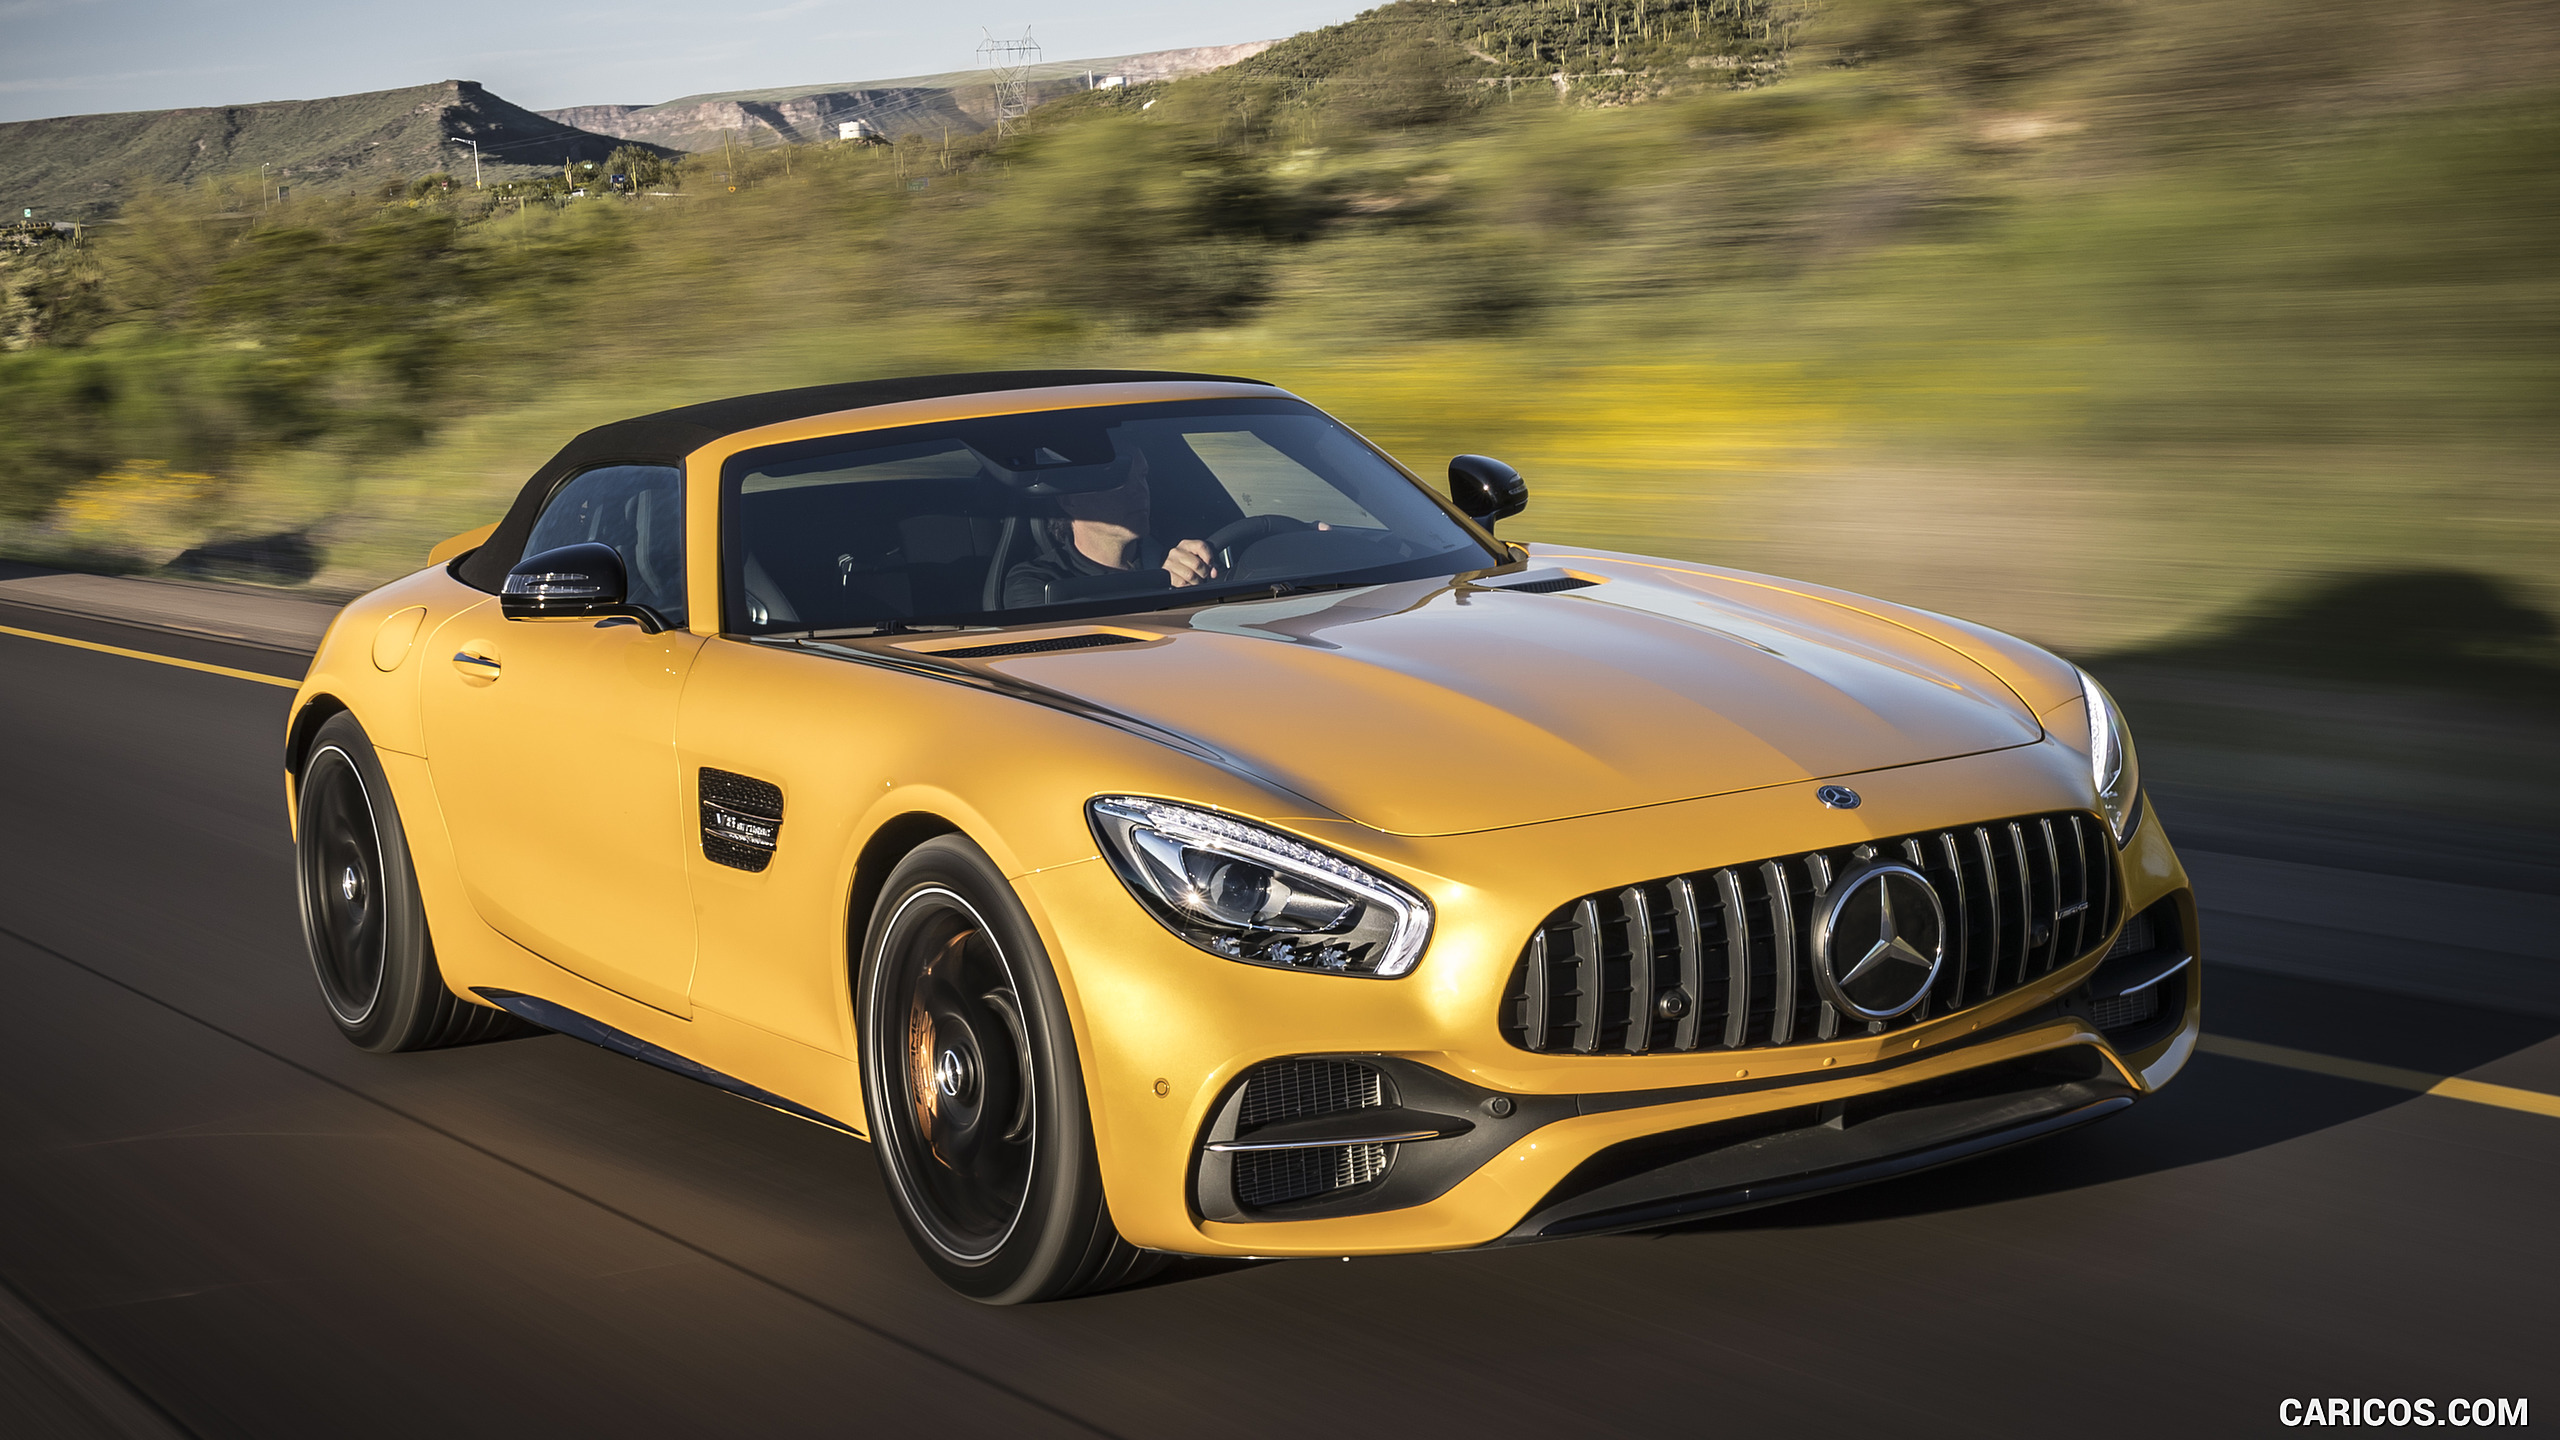 2018 Mercedes-AMG GT C Roadster - Front Three-Quarter, #200 of 350